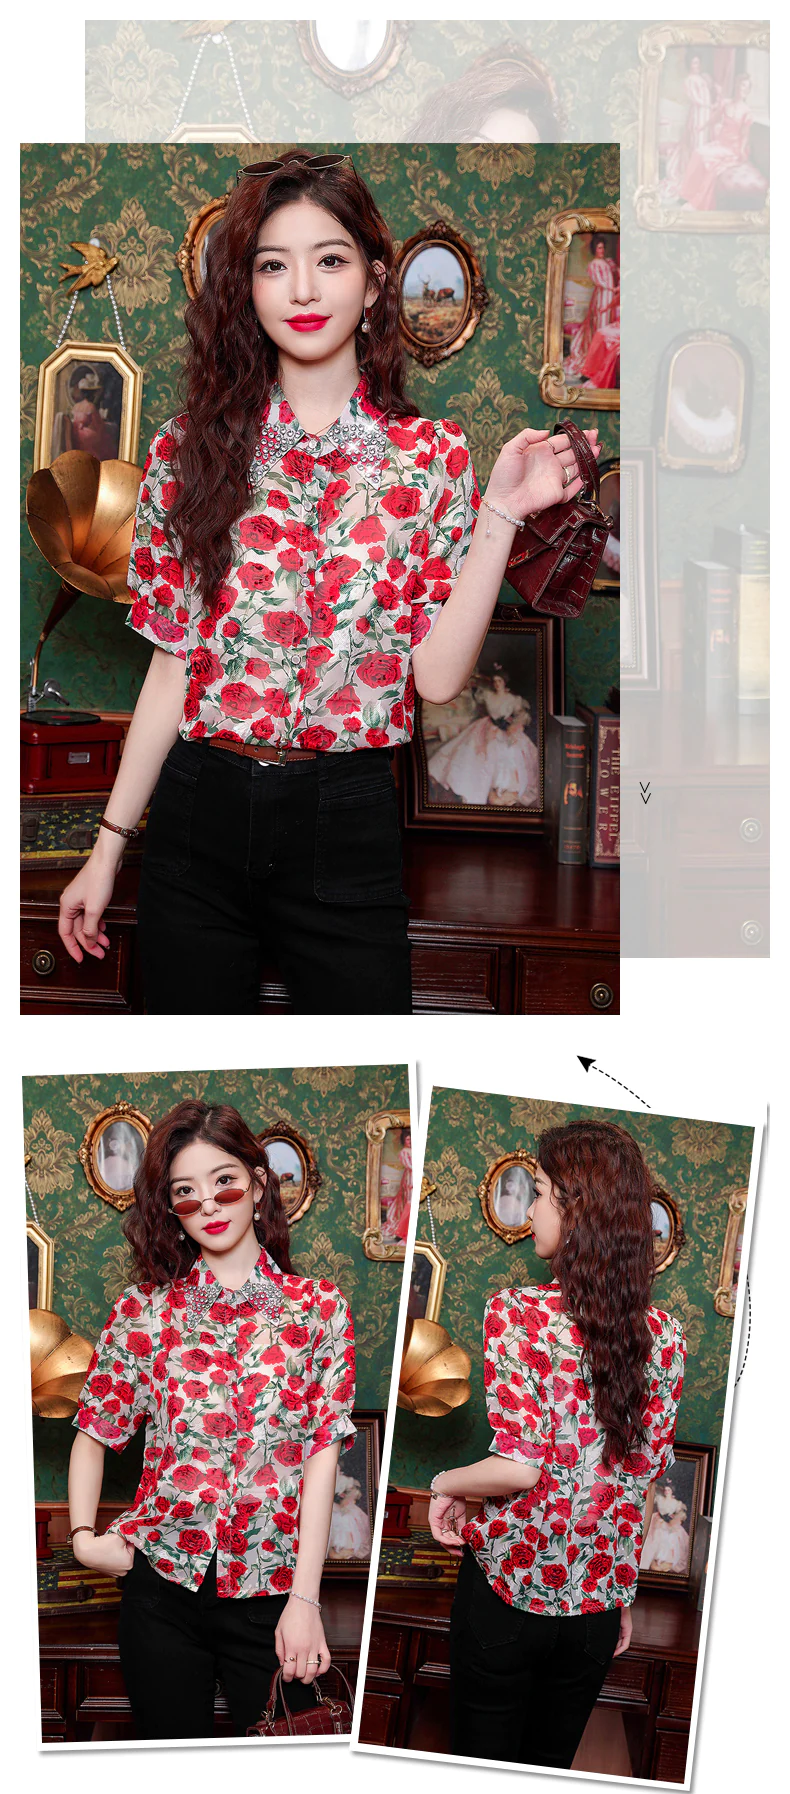 Womens-Fashionable-Red-Floral-Printed-Chiffon-Casual-Shirt-Blouse09